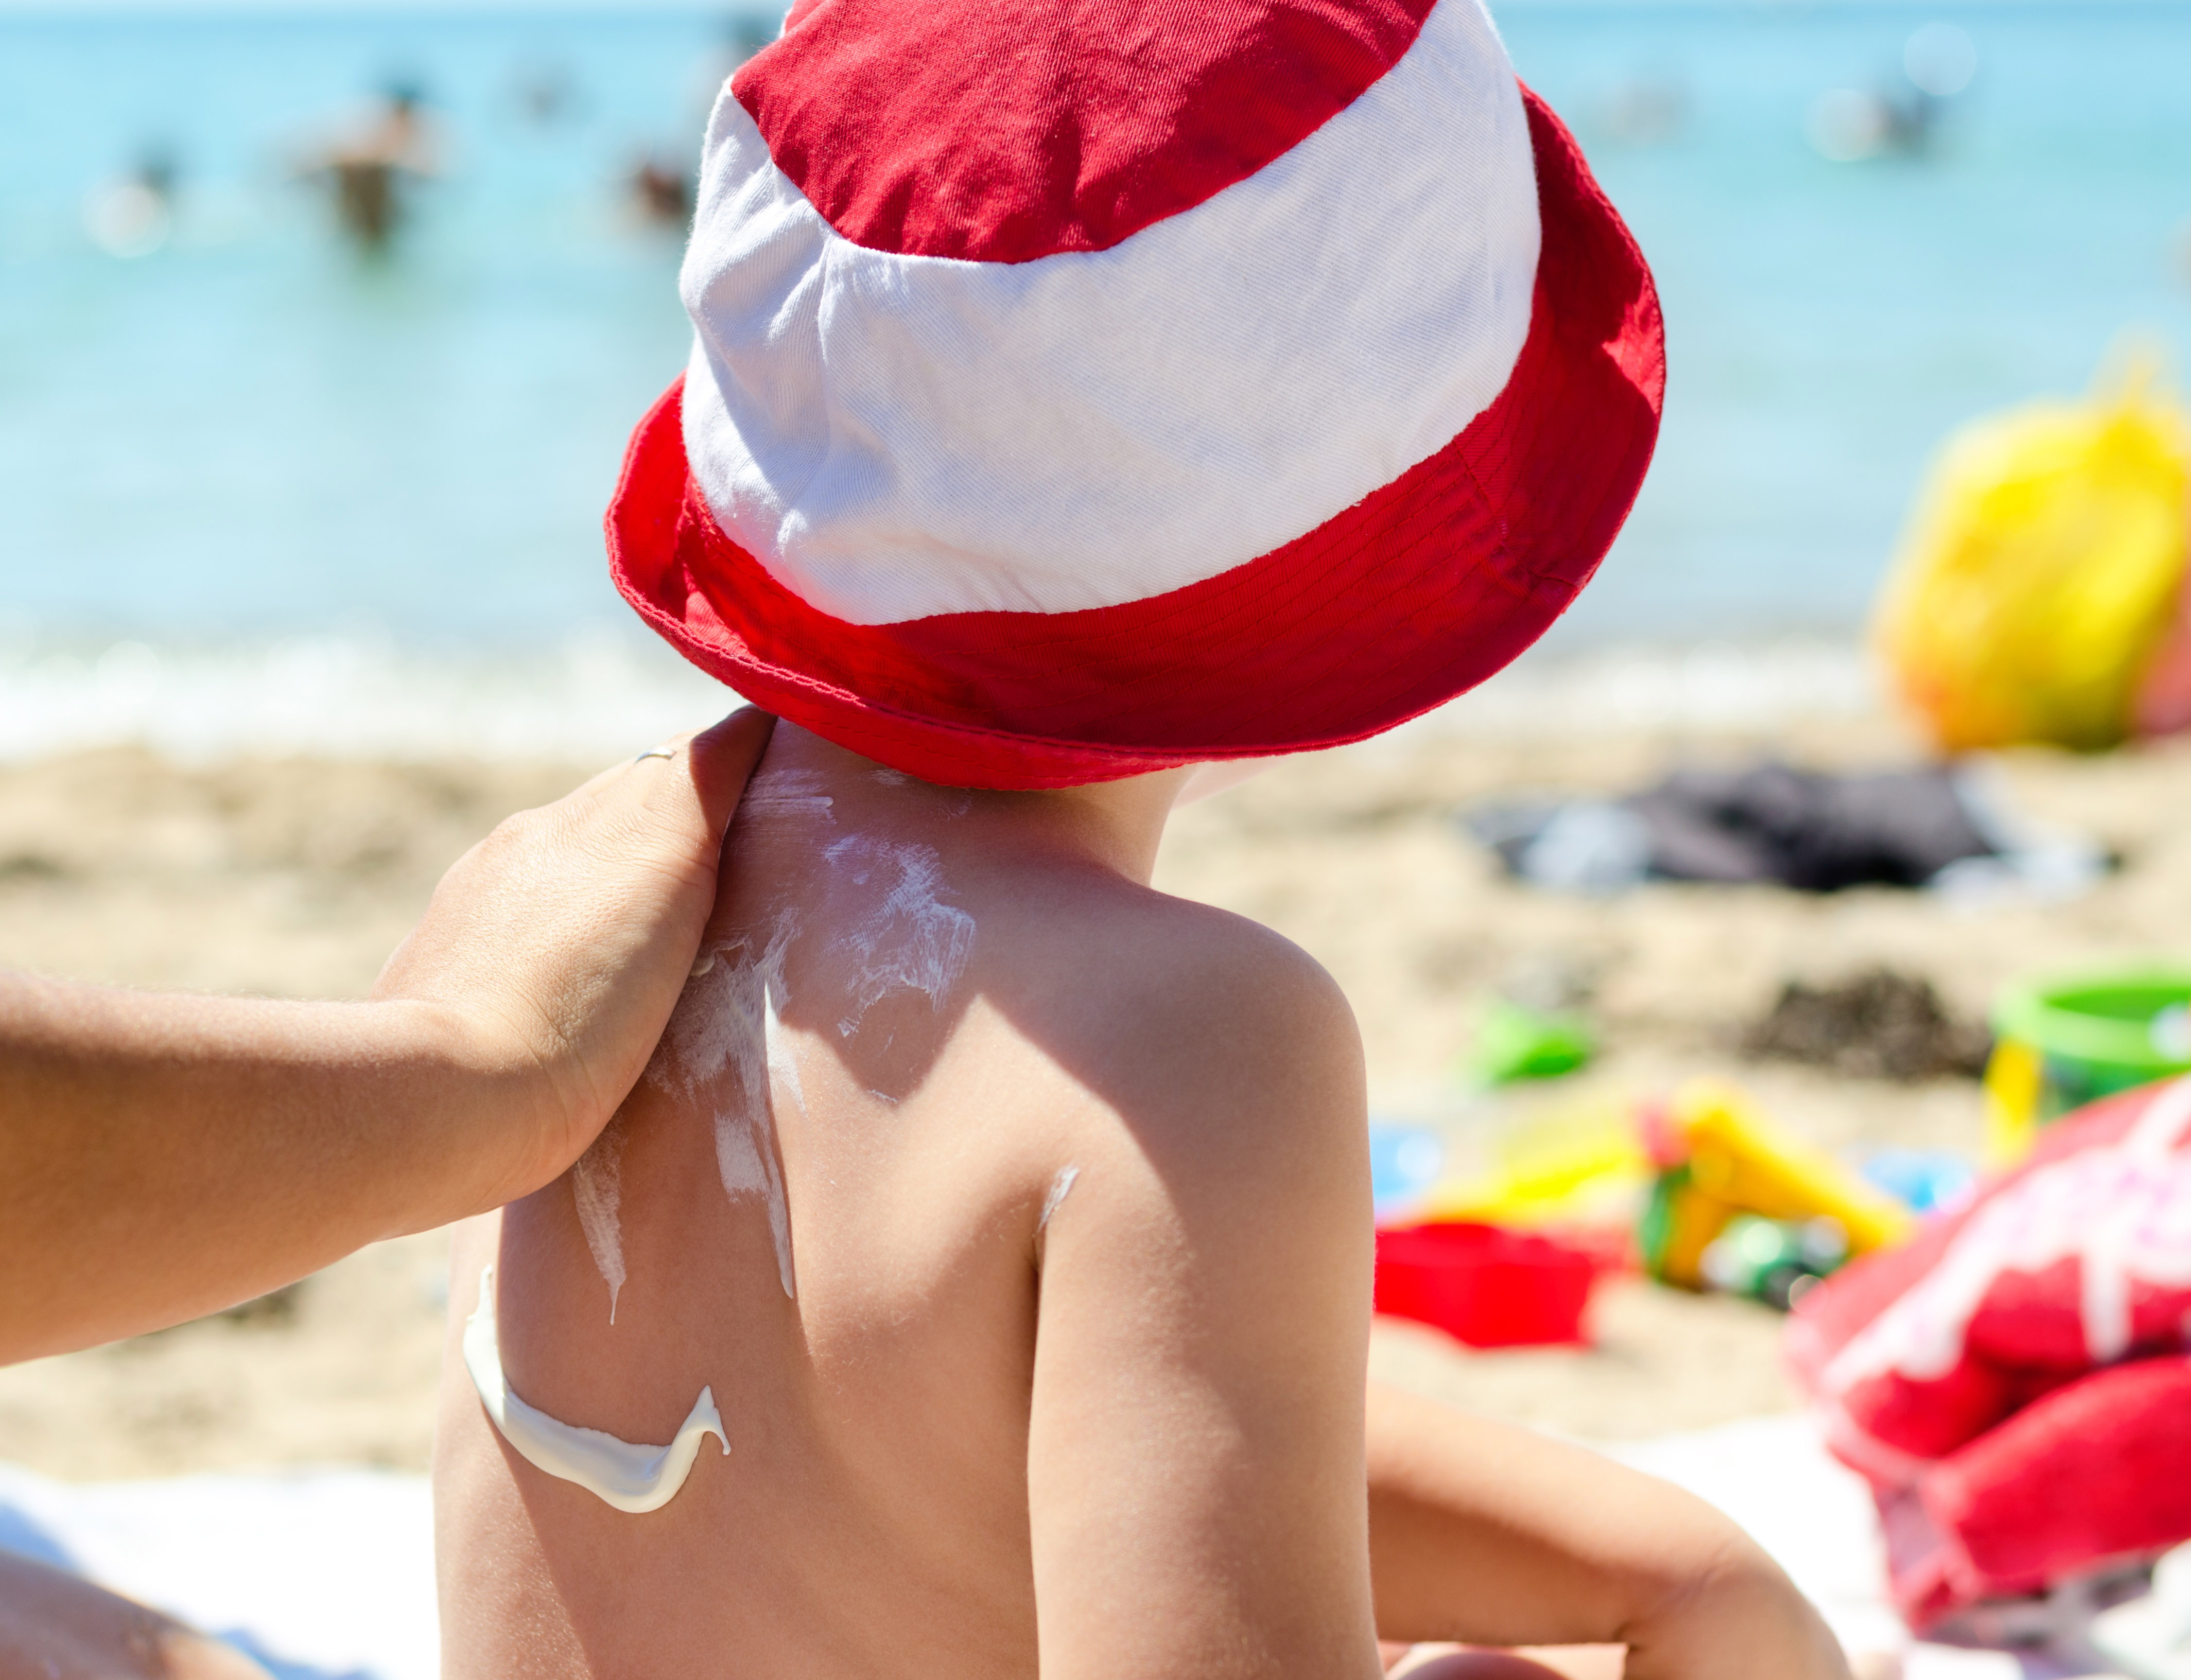 Young boy sitting on the beach during his summer vacation having sunscreen applied to his back by a parent to prevent burning from harmful UV rays